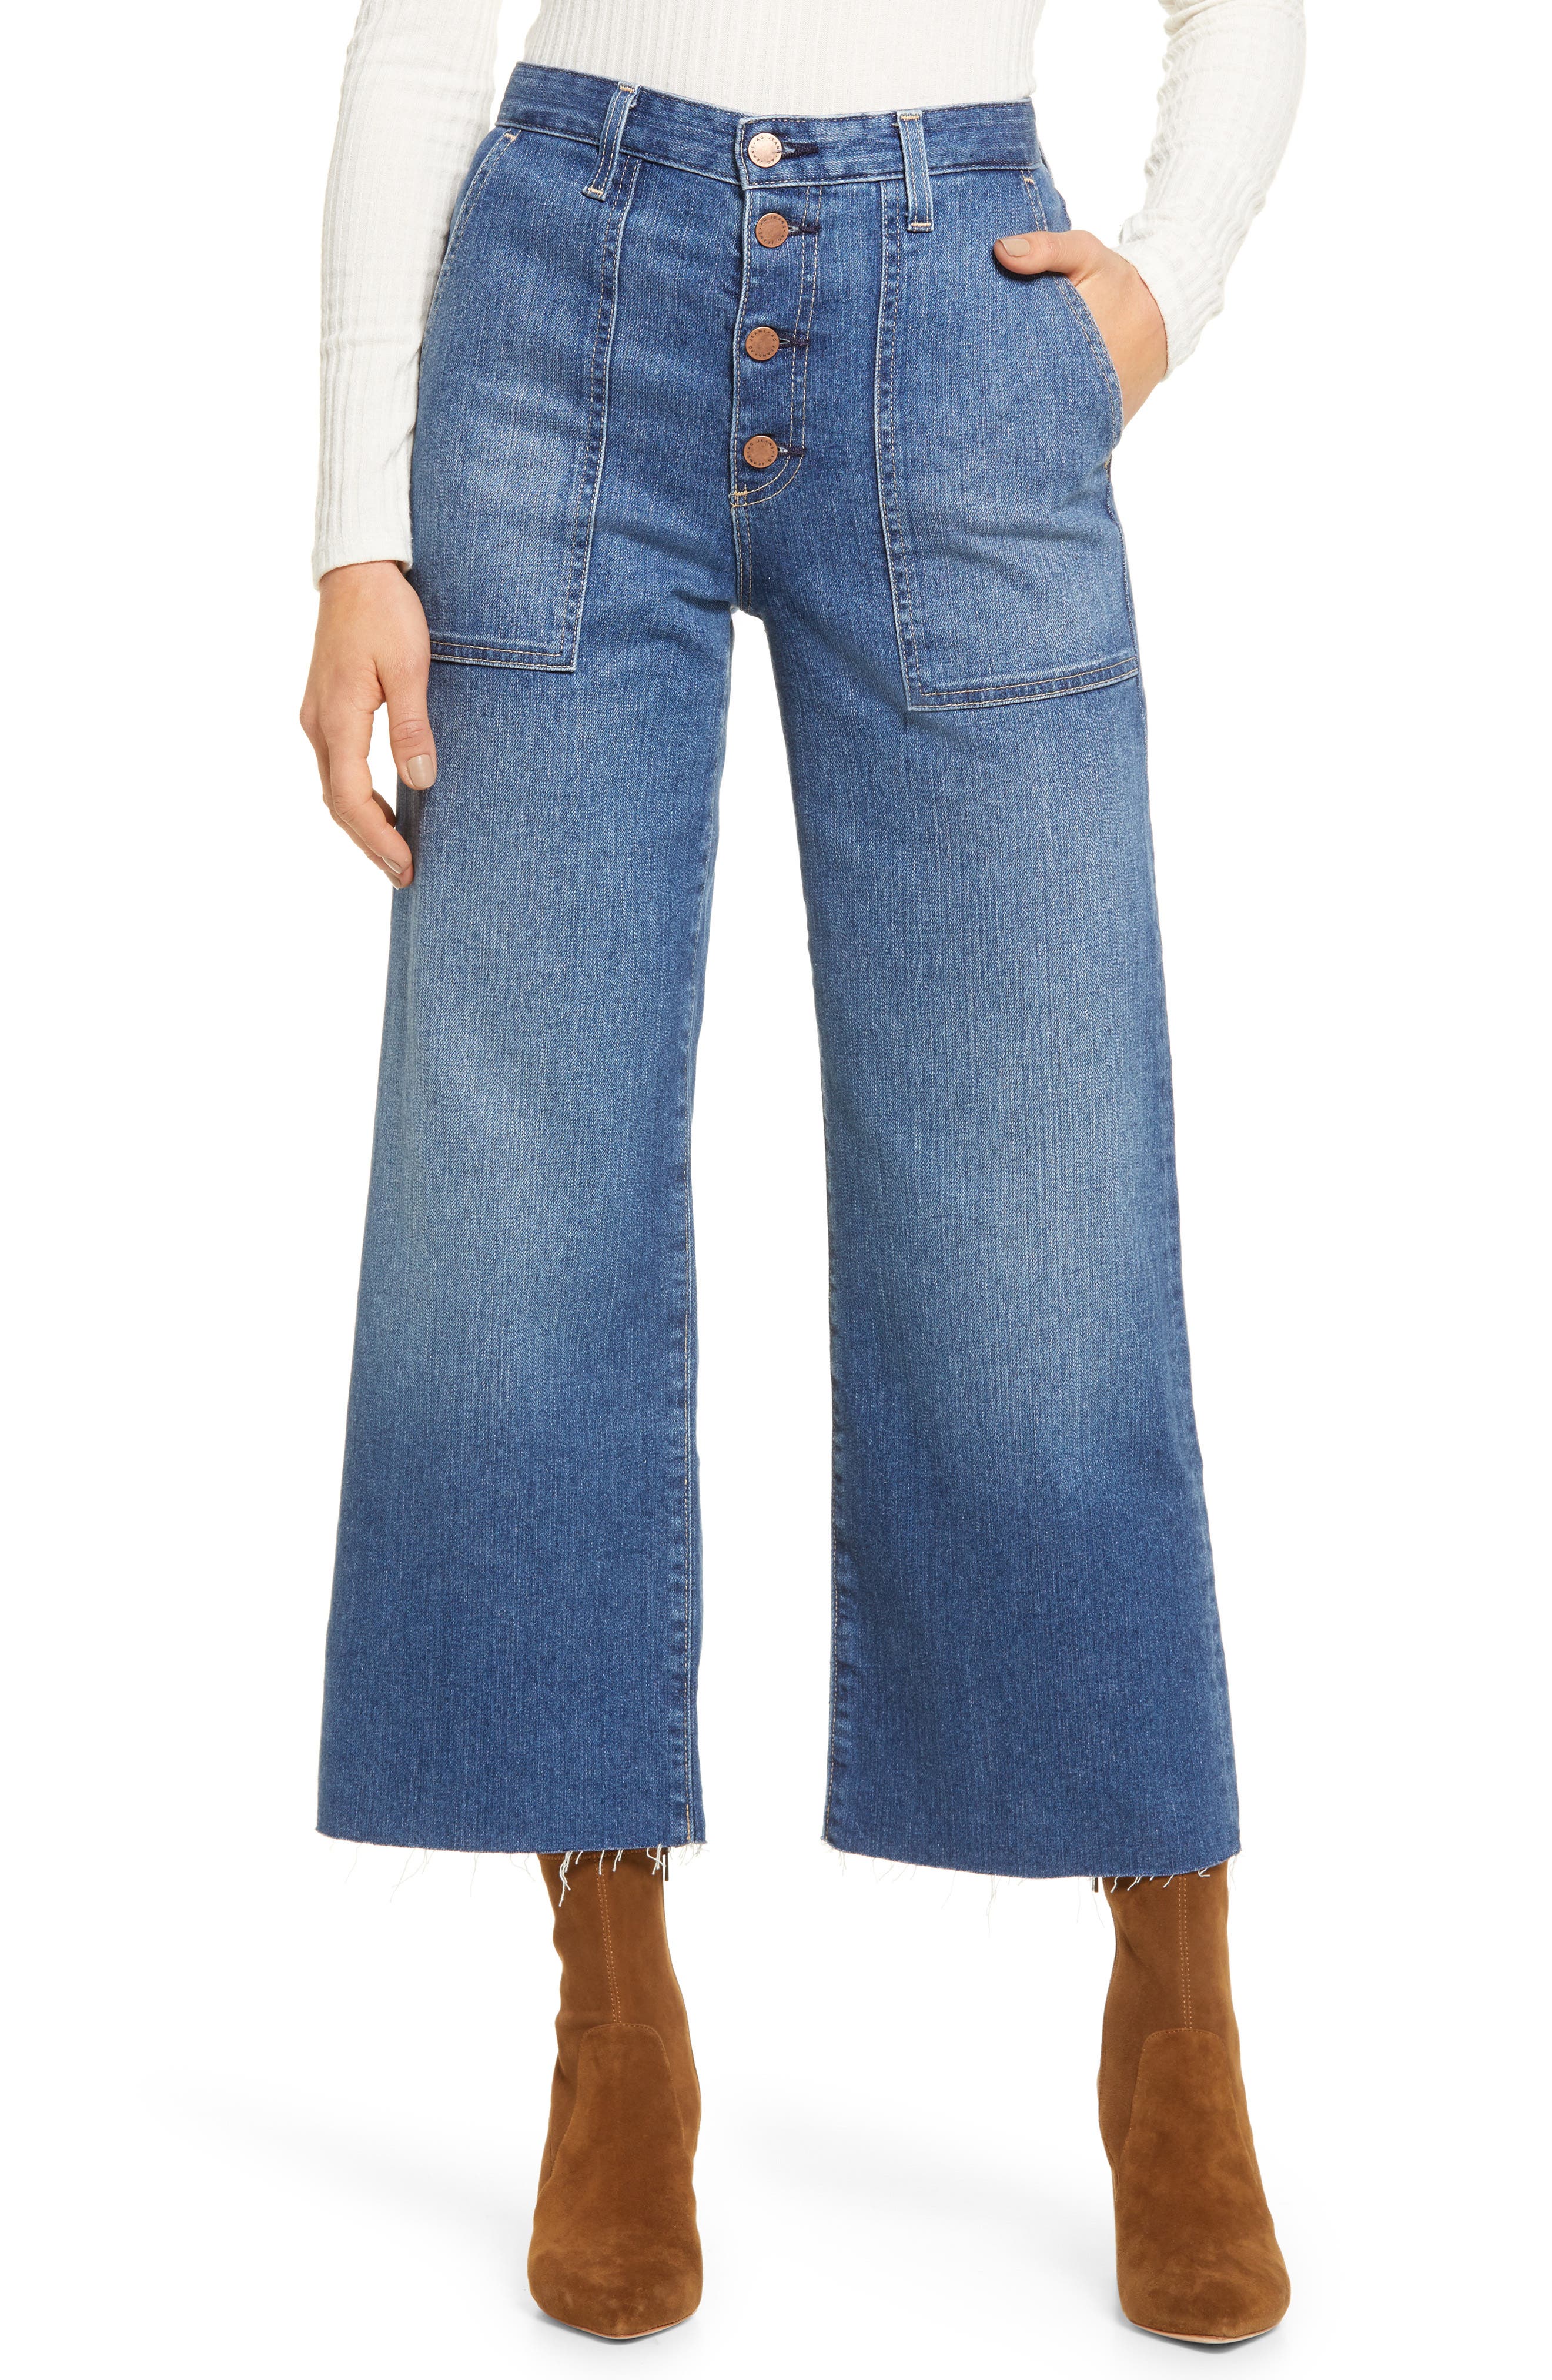 ag flare jeans